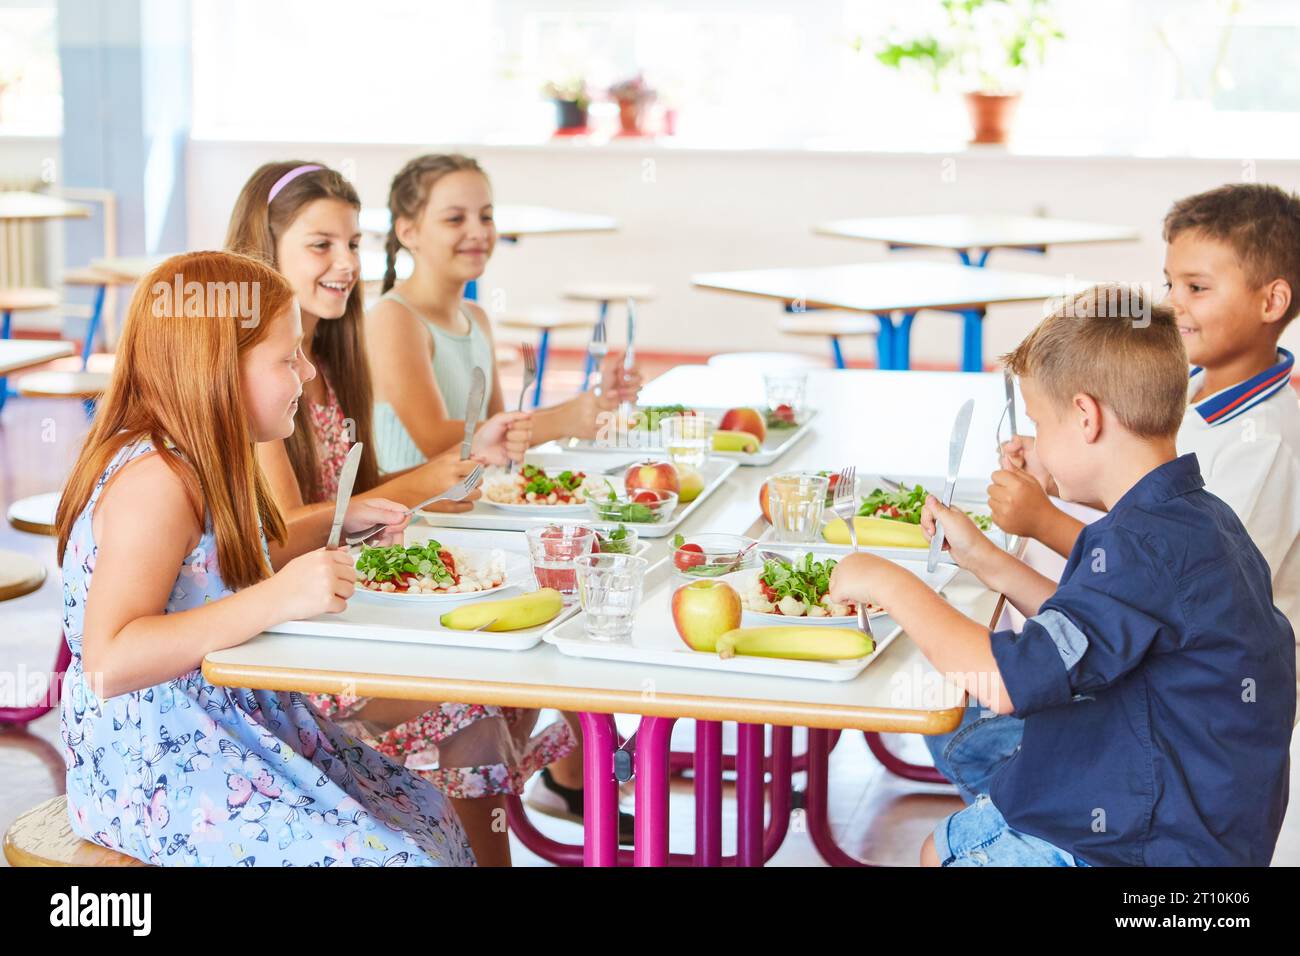 https://c8.alamy.com/comp/2T10K06/happy-kids-having-meal-with-cutlery-while-sitting-together-at-table-in-school-canteen-2T10K06.jpg